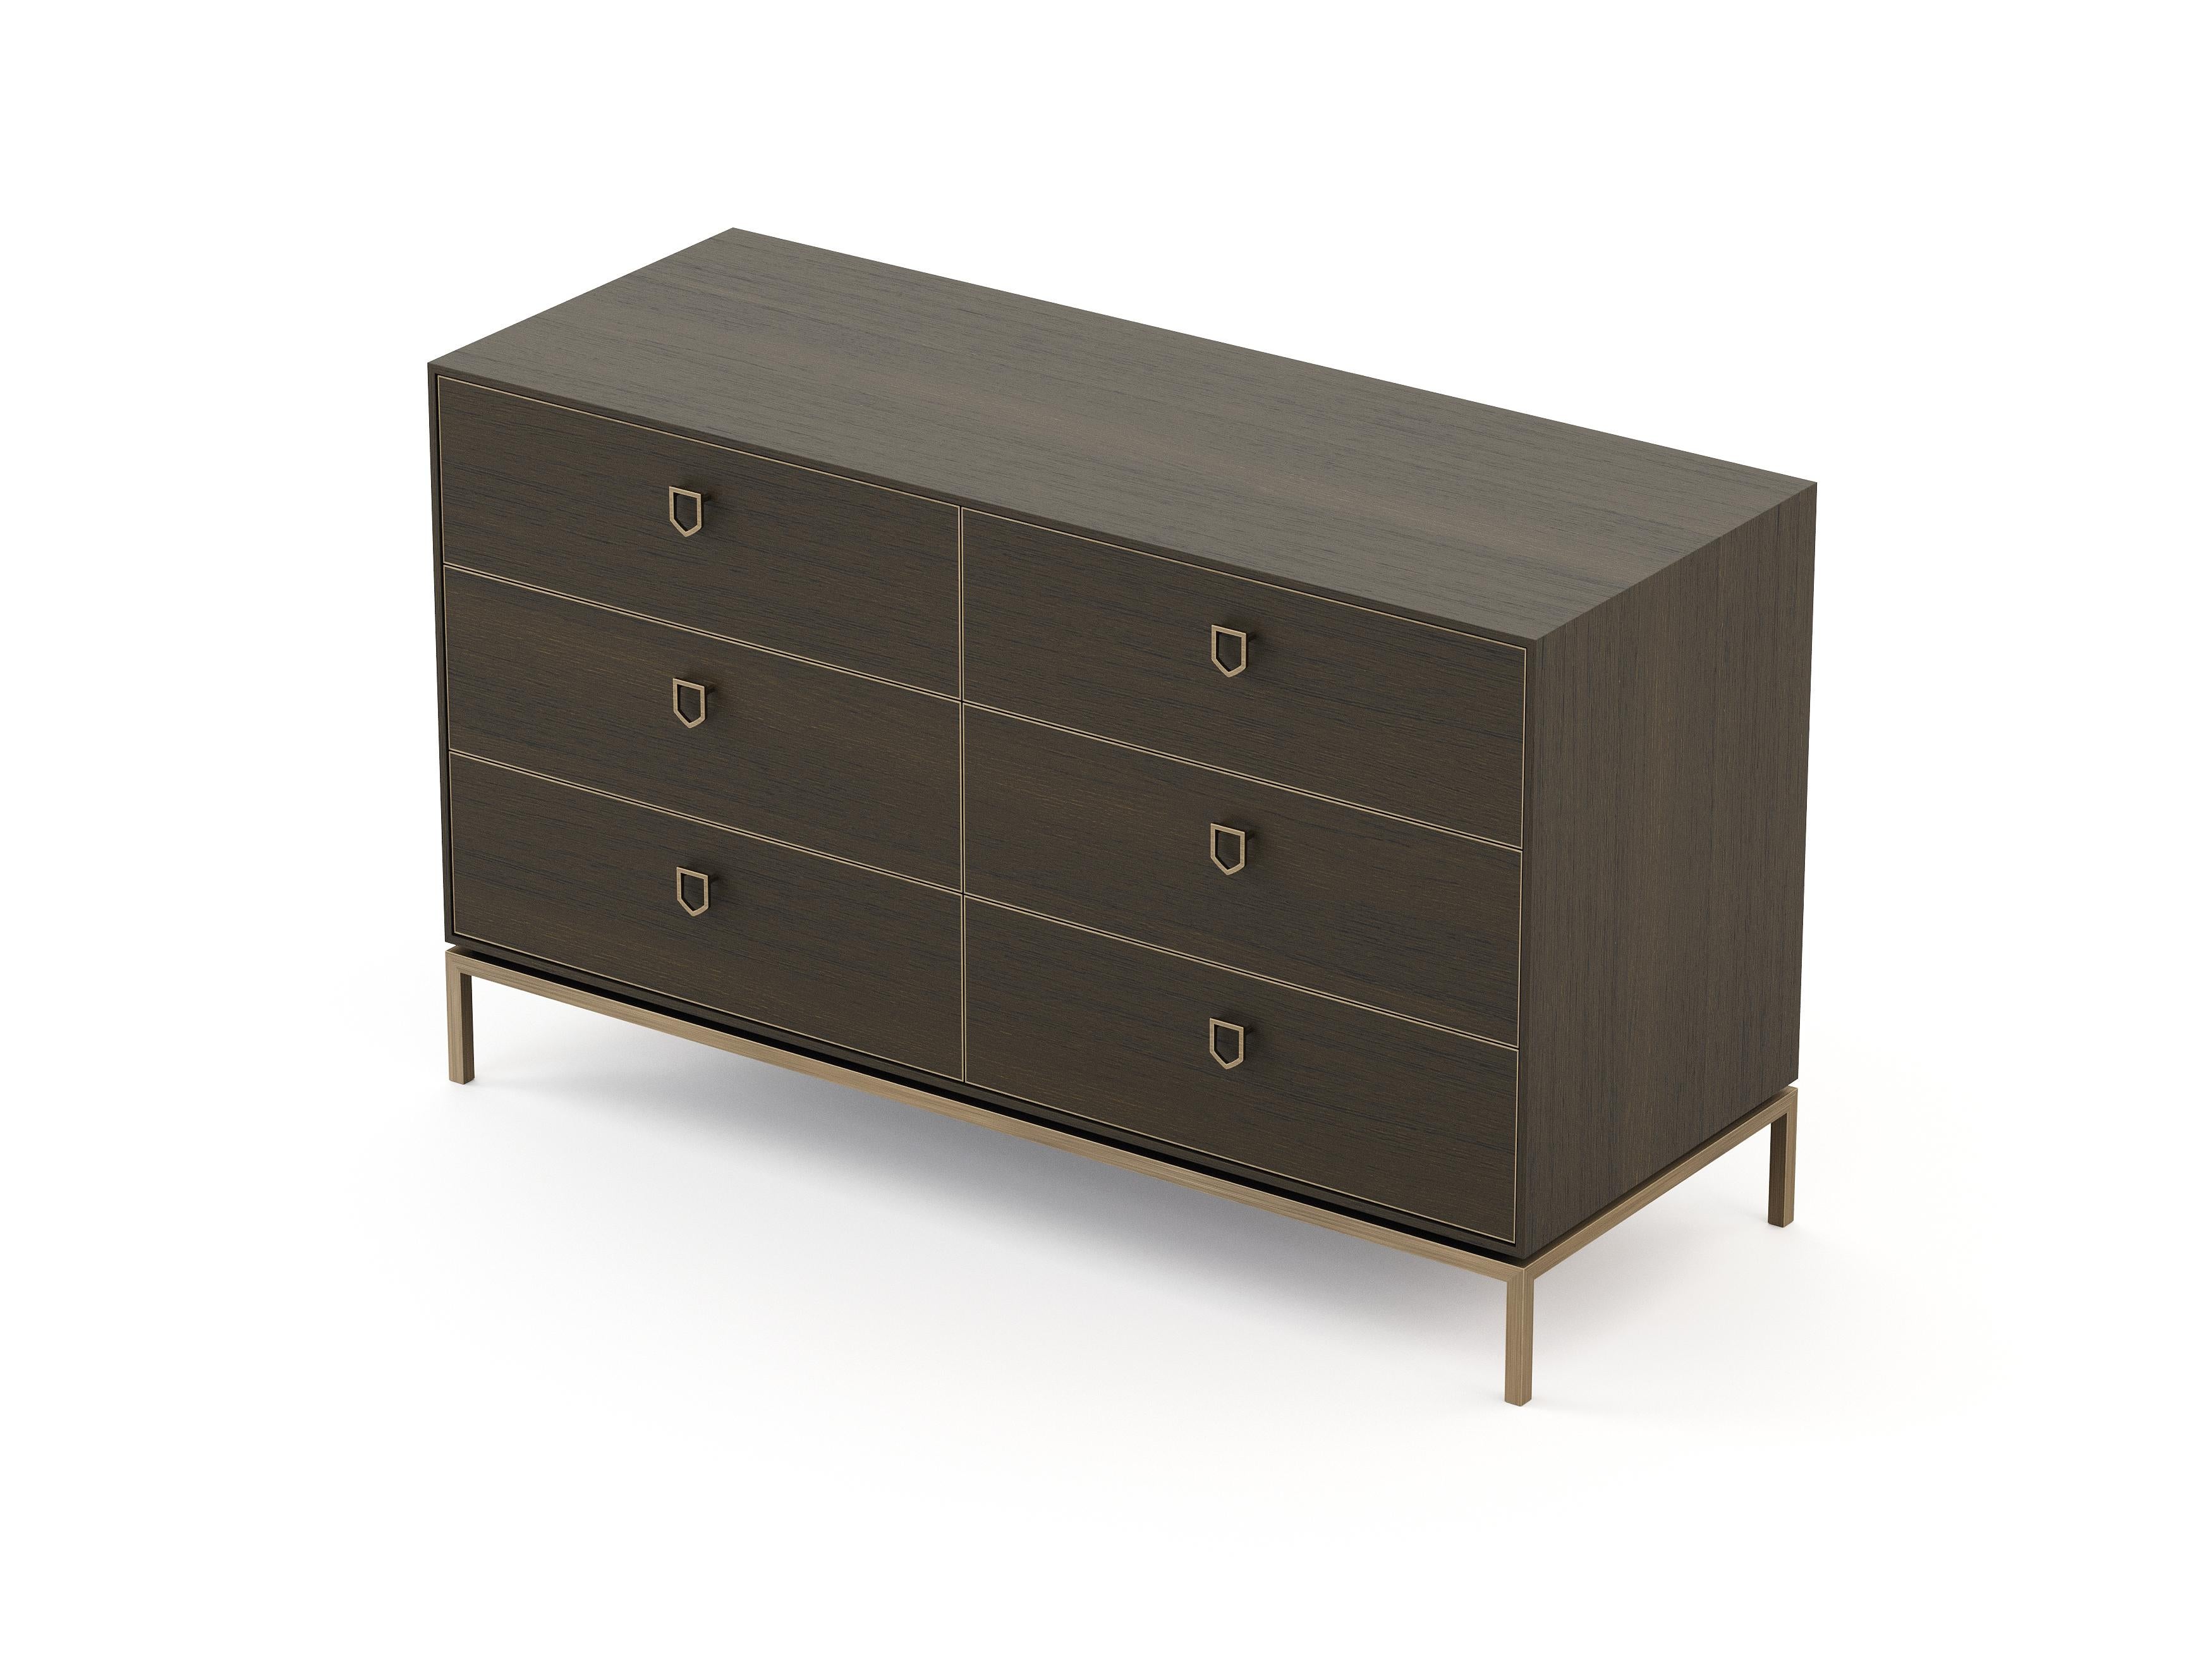 Portuguese Mid-Century Modern Cocktail Chest of Drawers Made with Mate Oak by Stylish Club For Sale